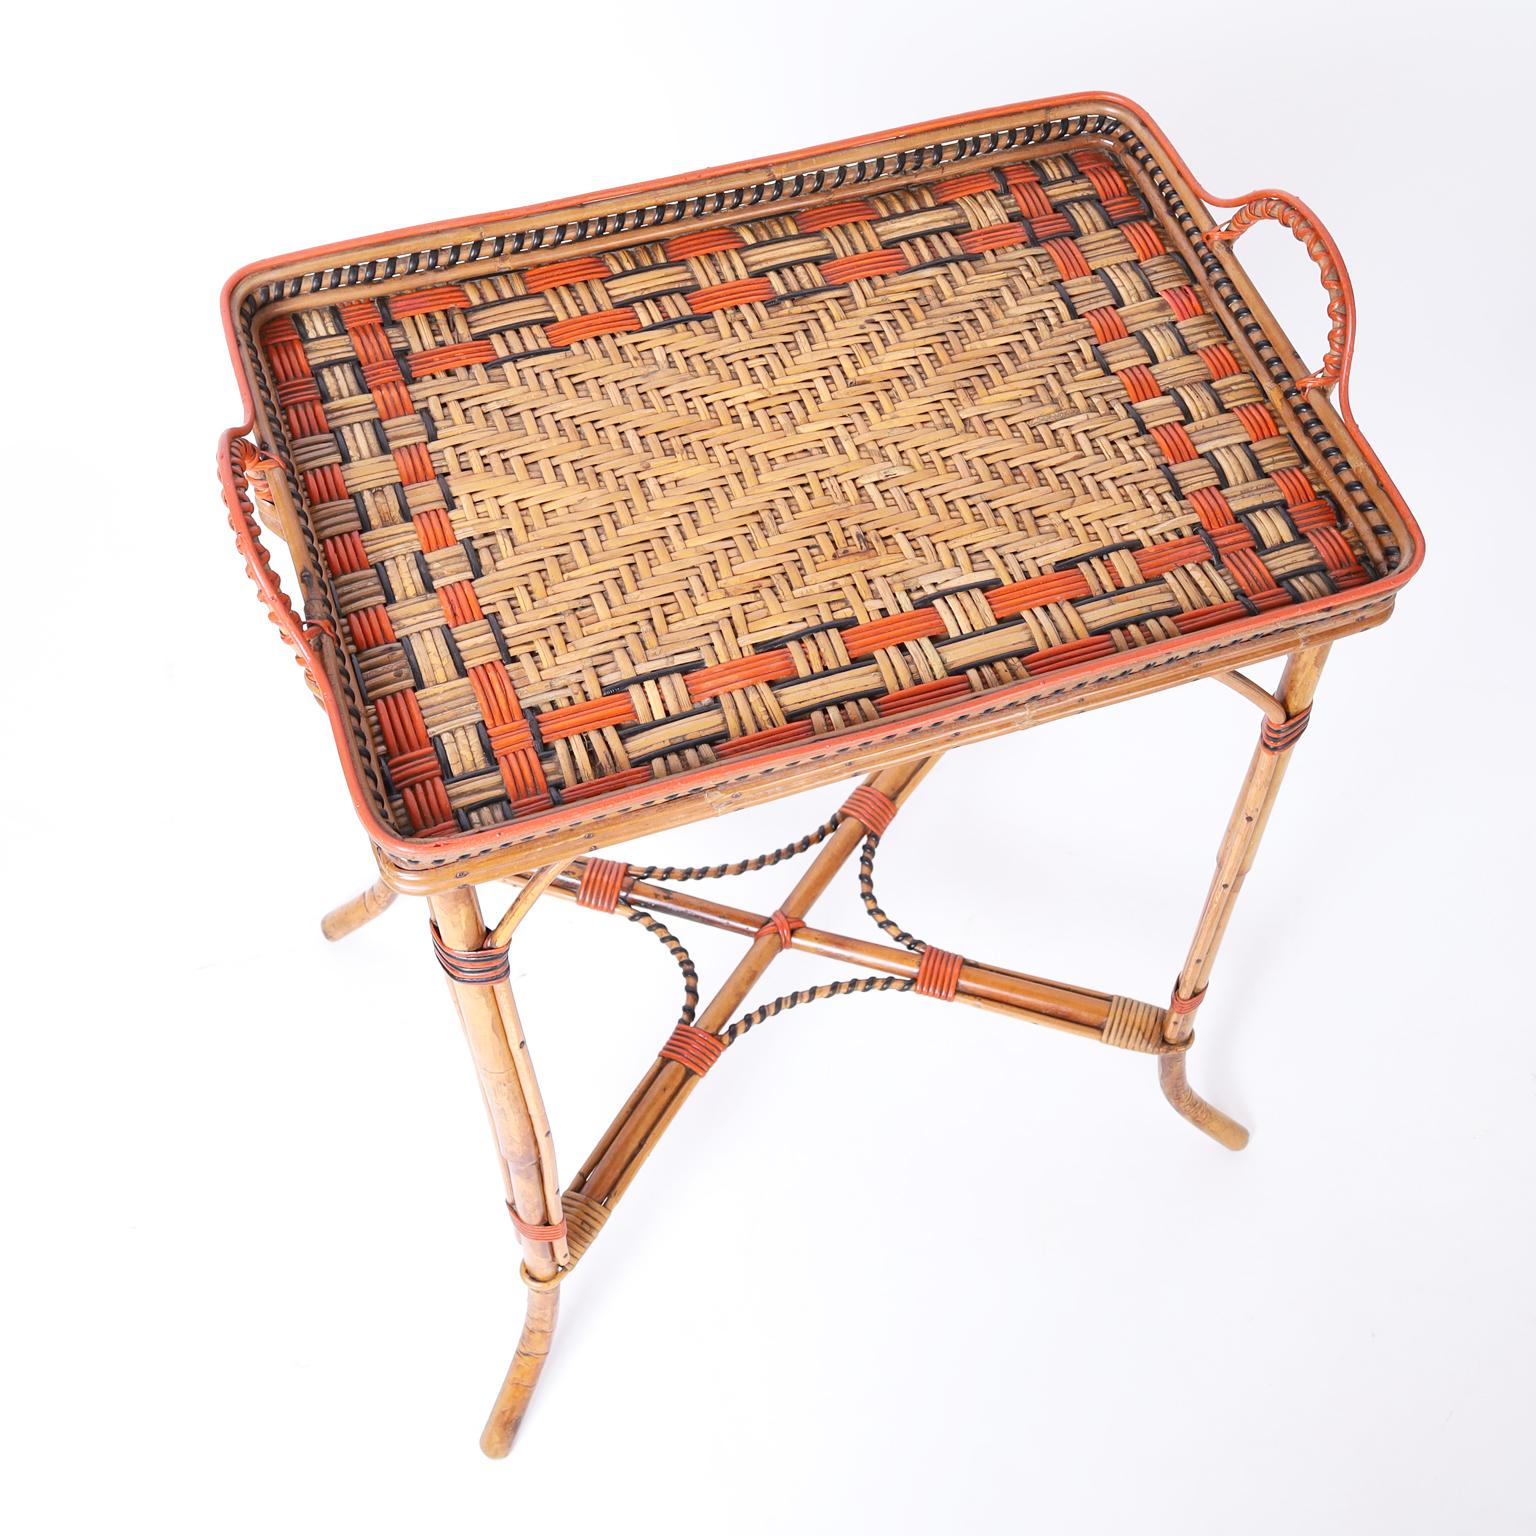 Hand-Woven Bamboo and Rattan Serving Stand or Bar